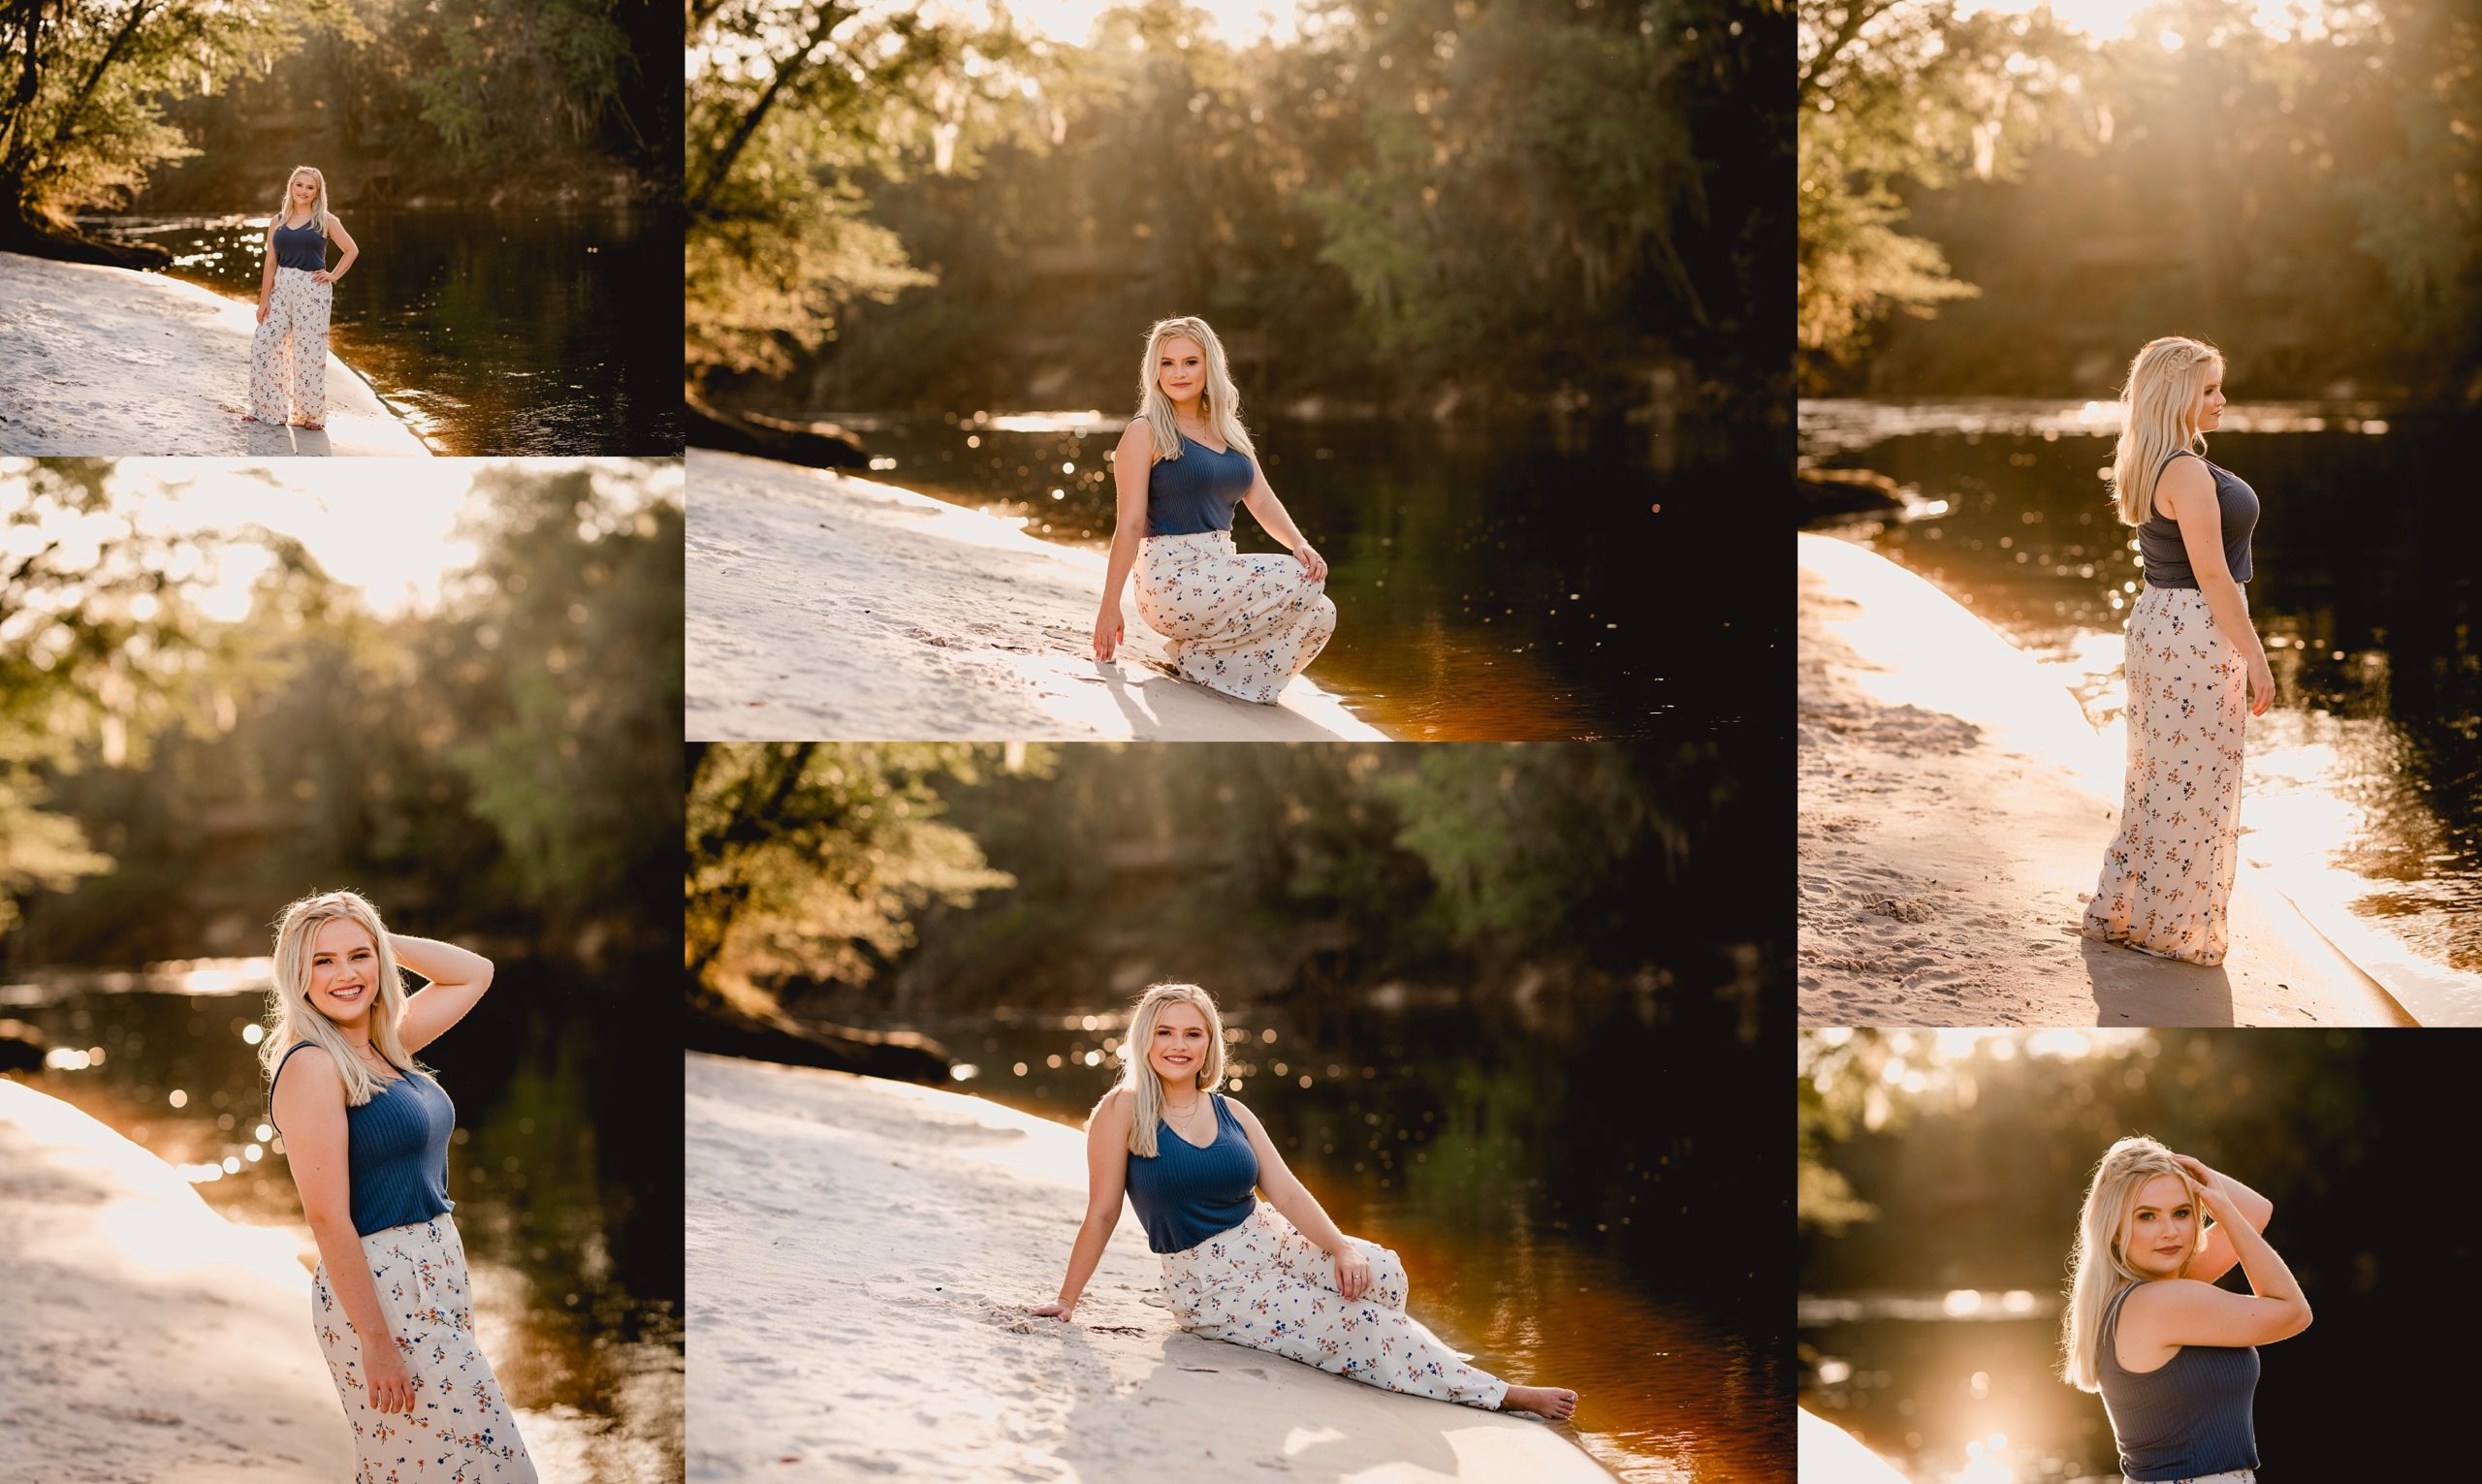 Senior pictures along a river in south georgia during the golden hour.